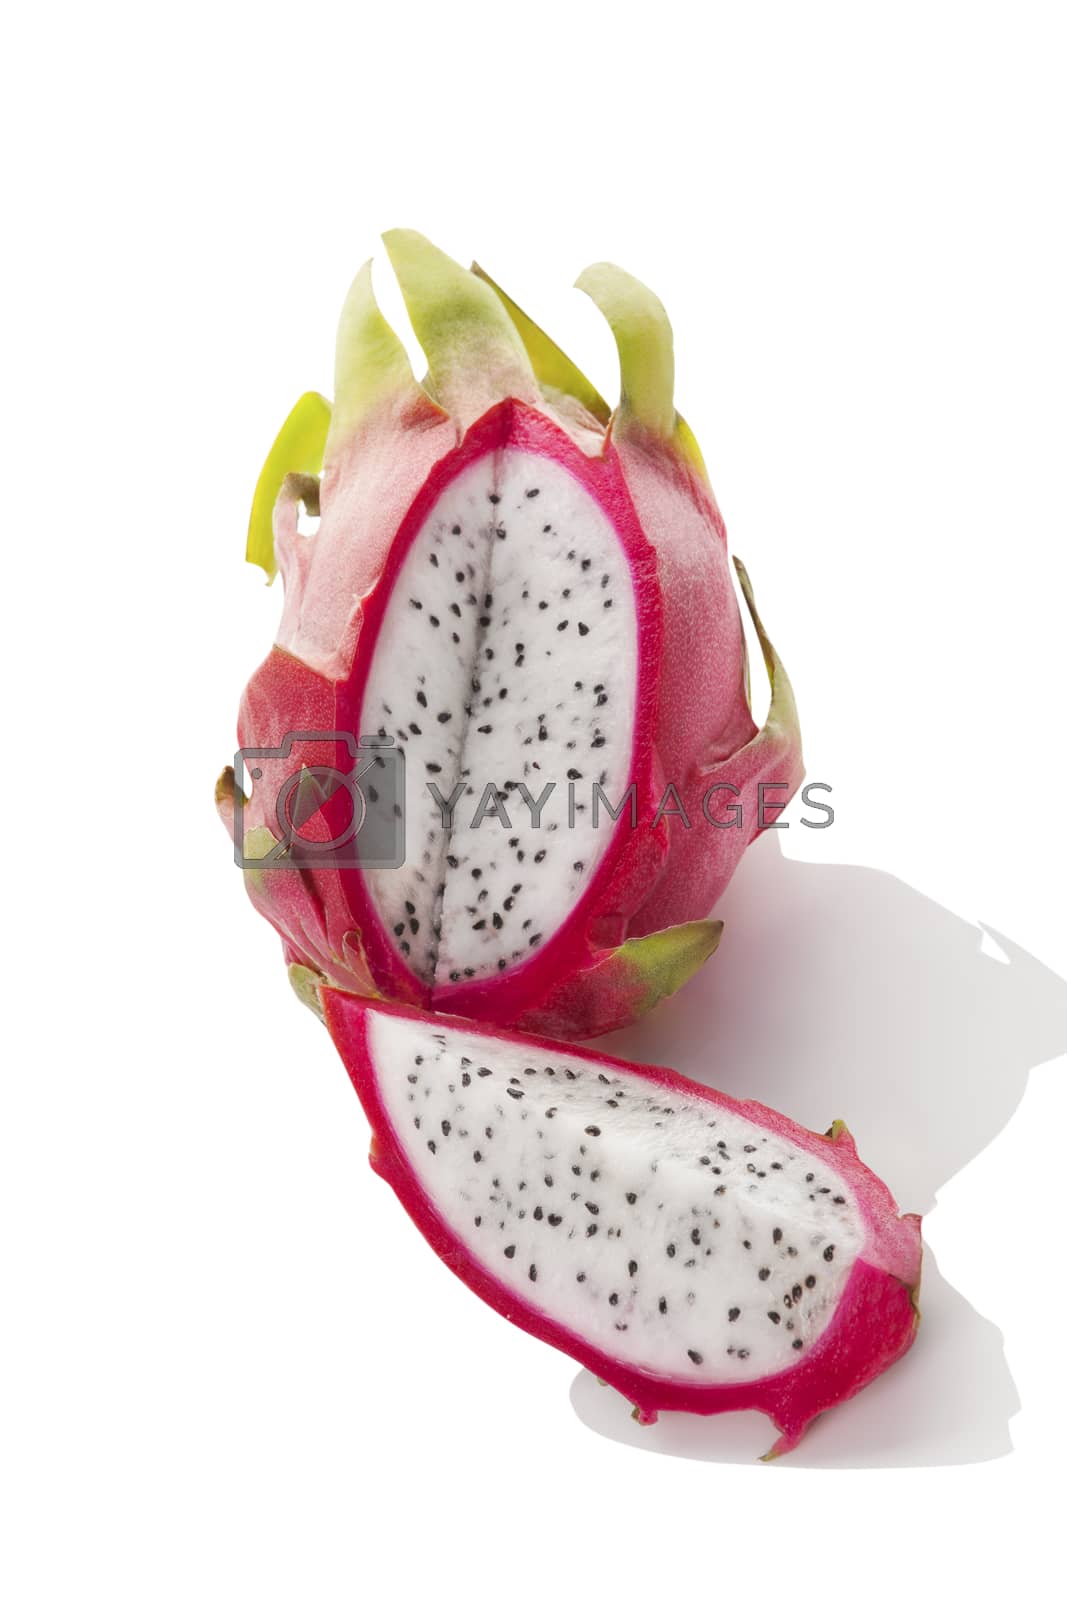 Royalty free image of Dragon fruit. by eskymaks